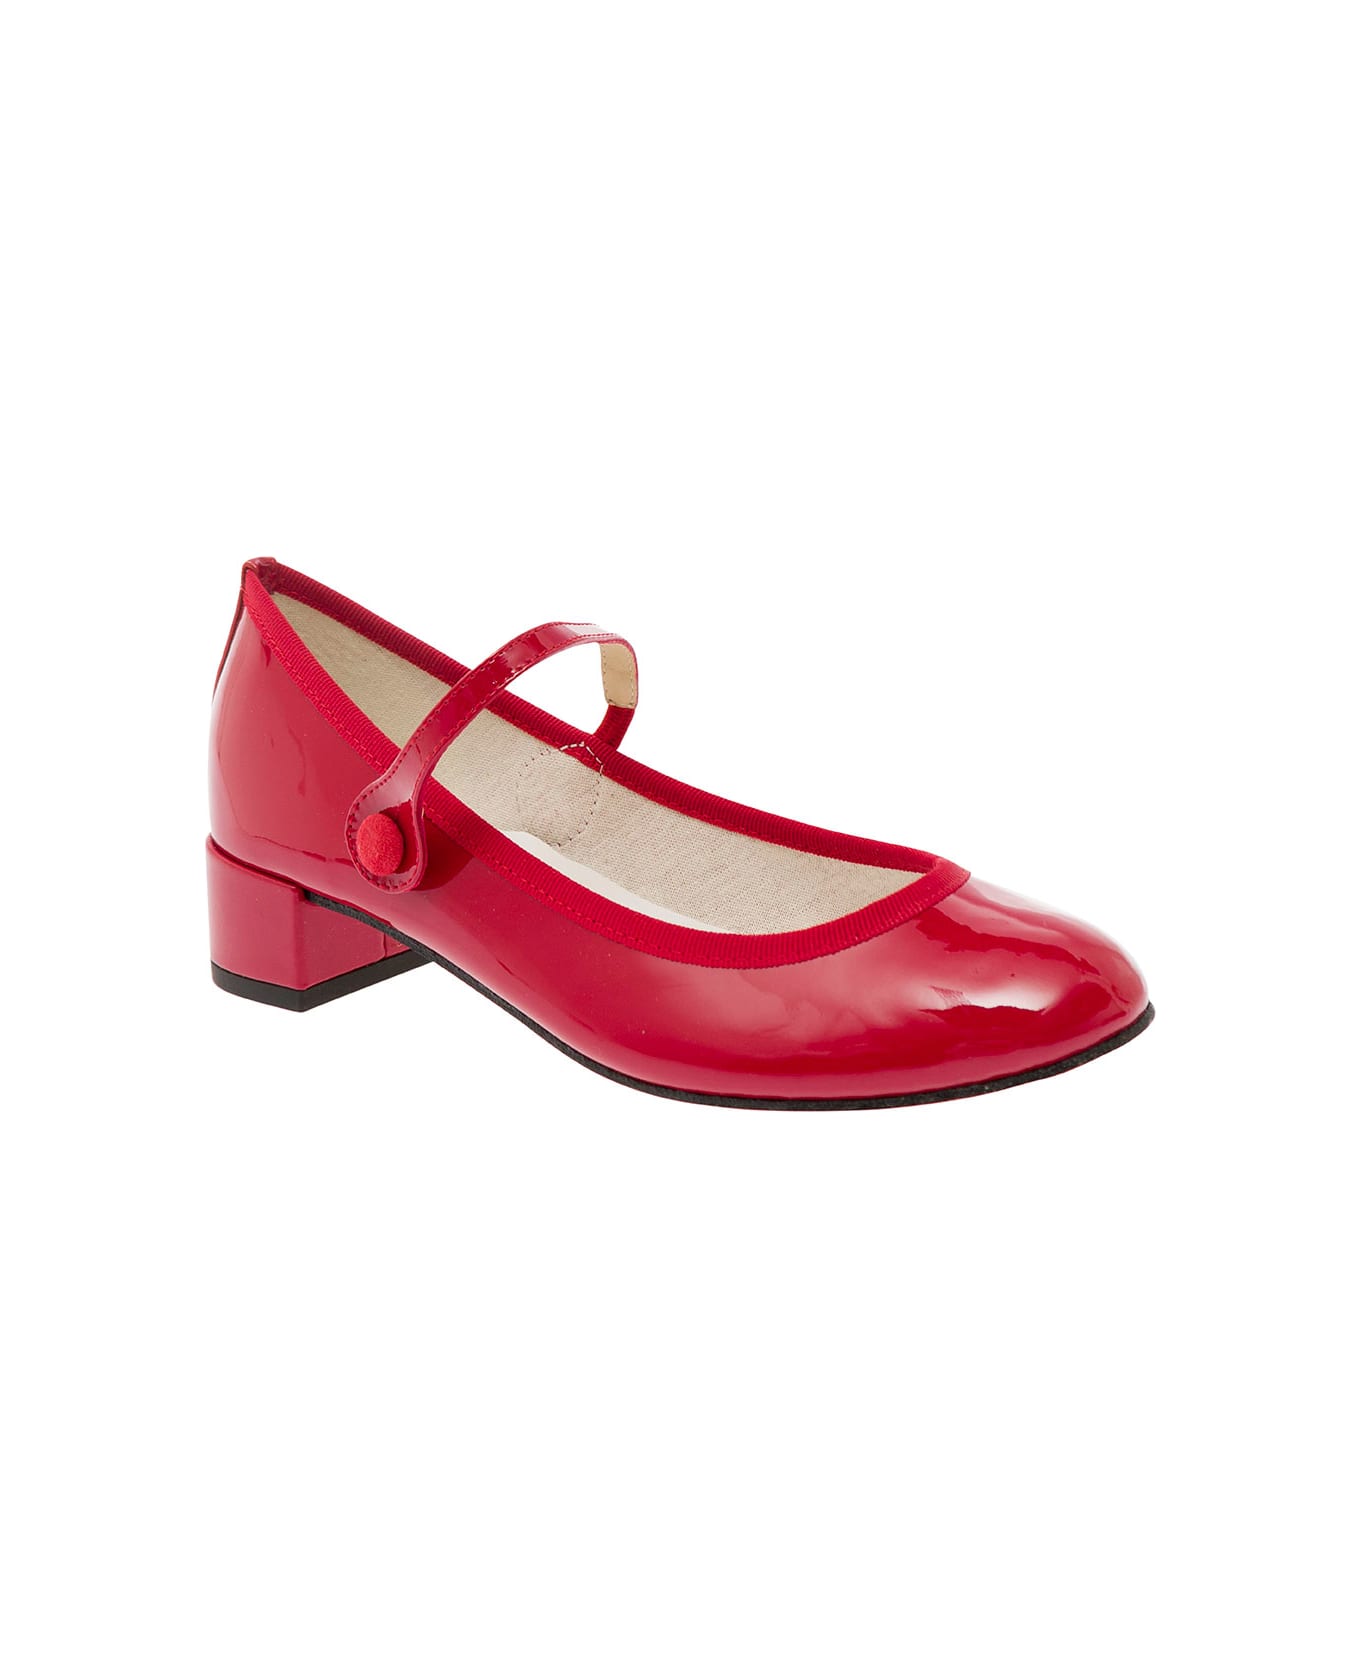 Repetto 'rose' Red Mary Janes With Strap In Patent Leather Woman - Red